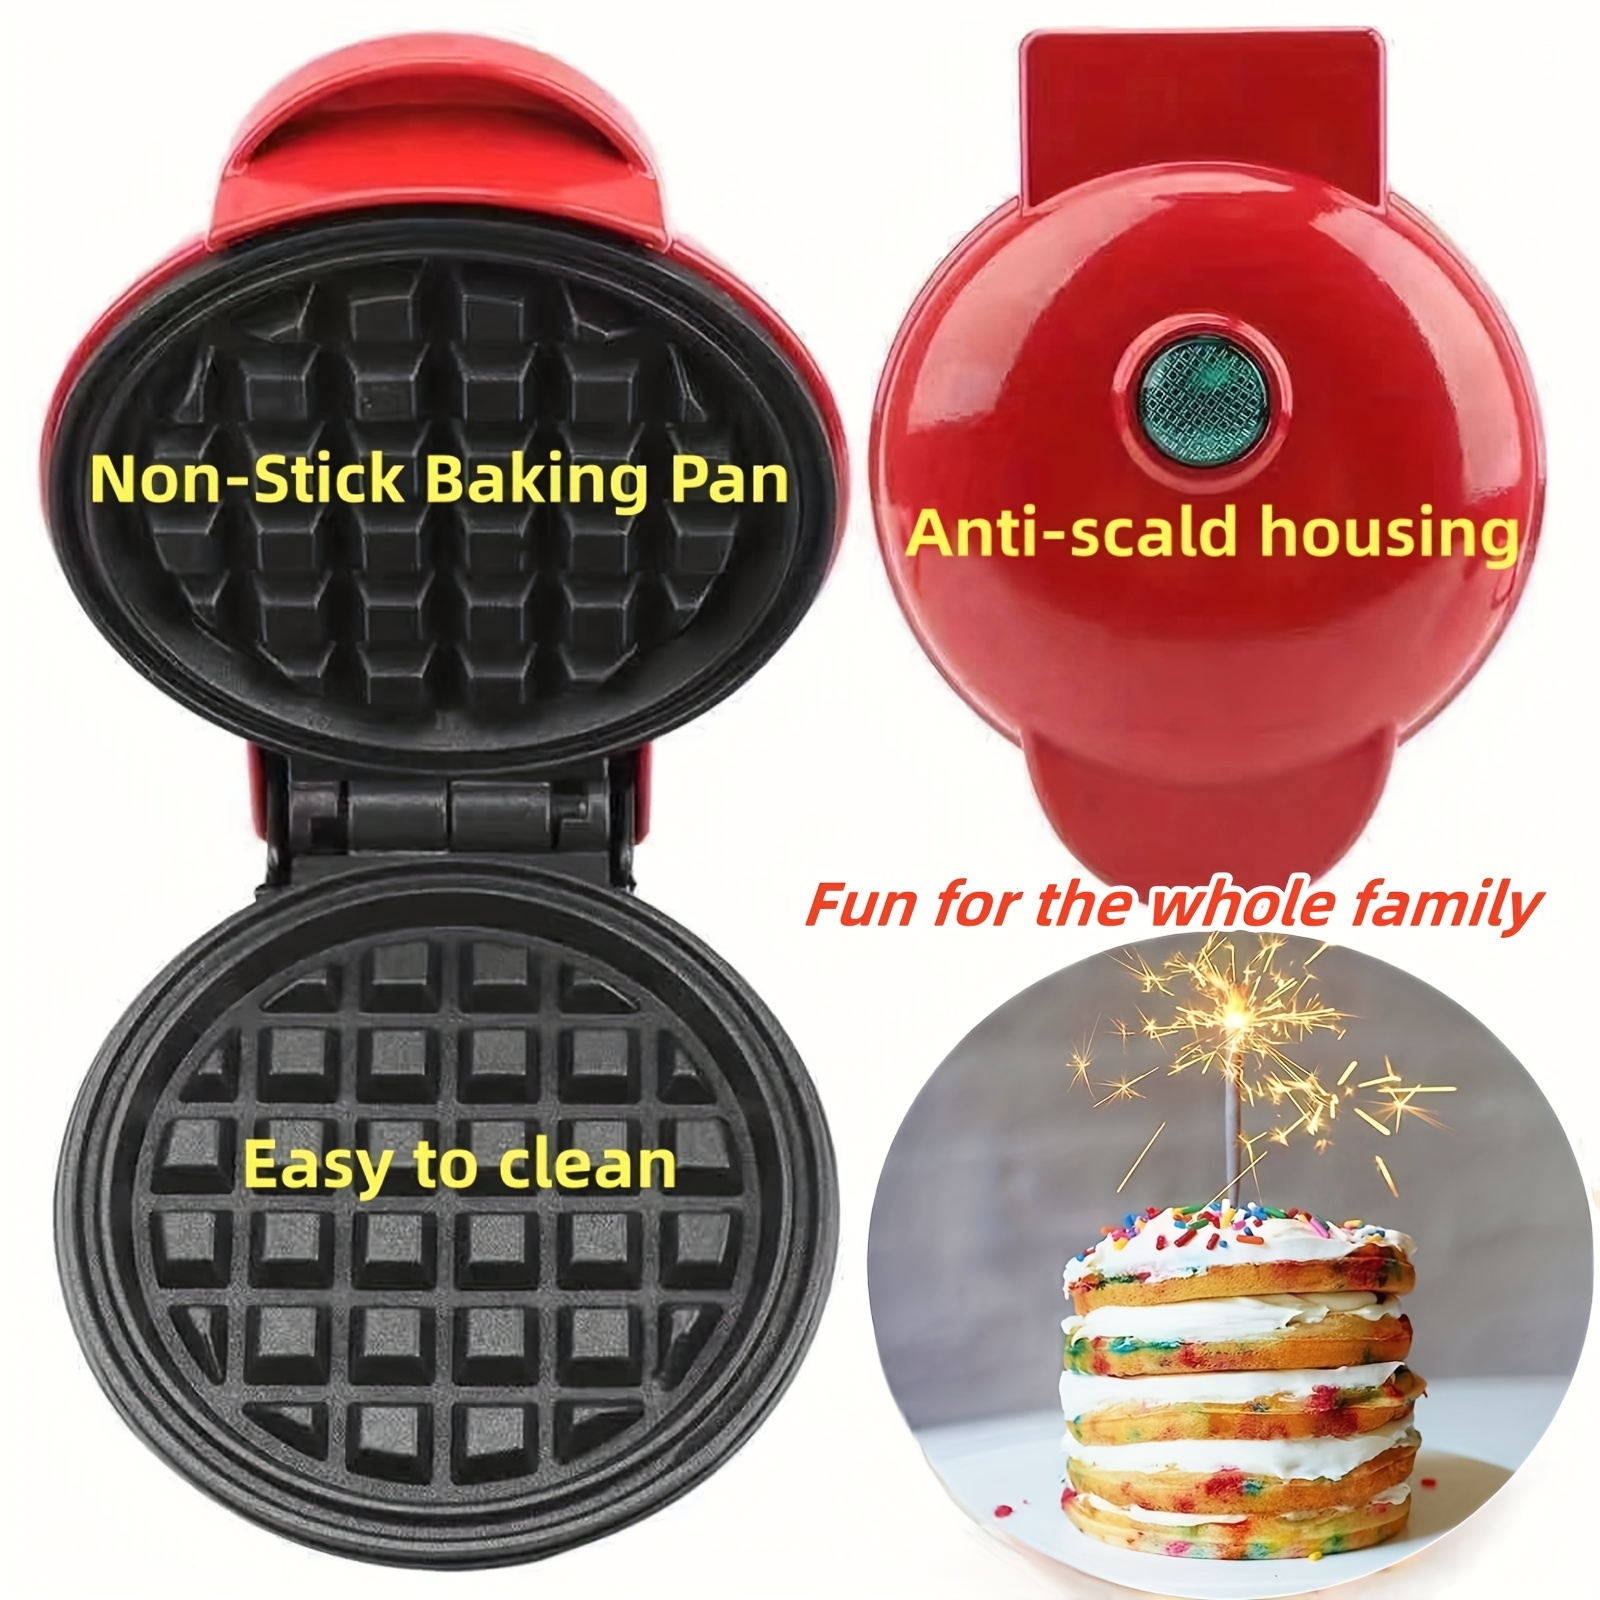 Mini Waffle Maker Portable Electric Round Waffle Maker Grill Machine for Individual Pancakes, Cookies, Eggs Individual Waffles, Paninis, Hash Browns